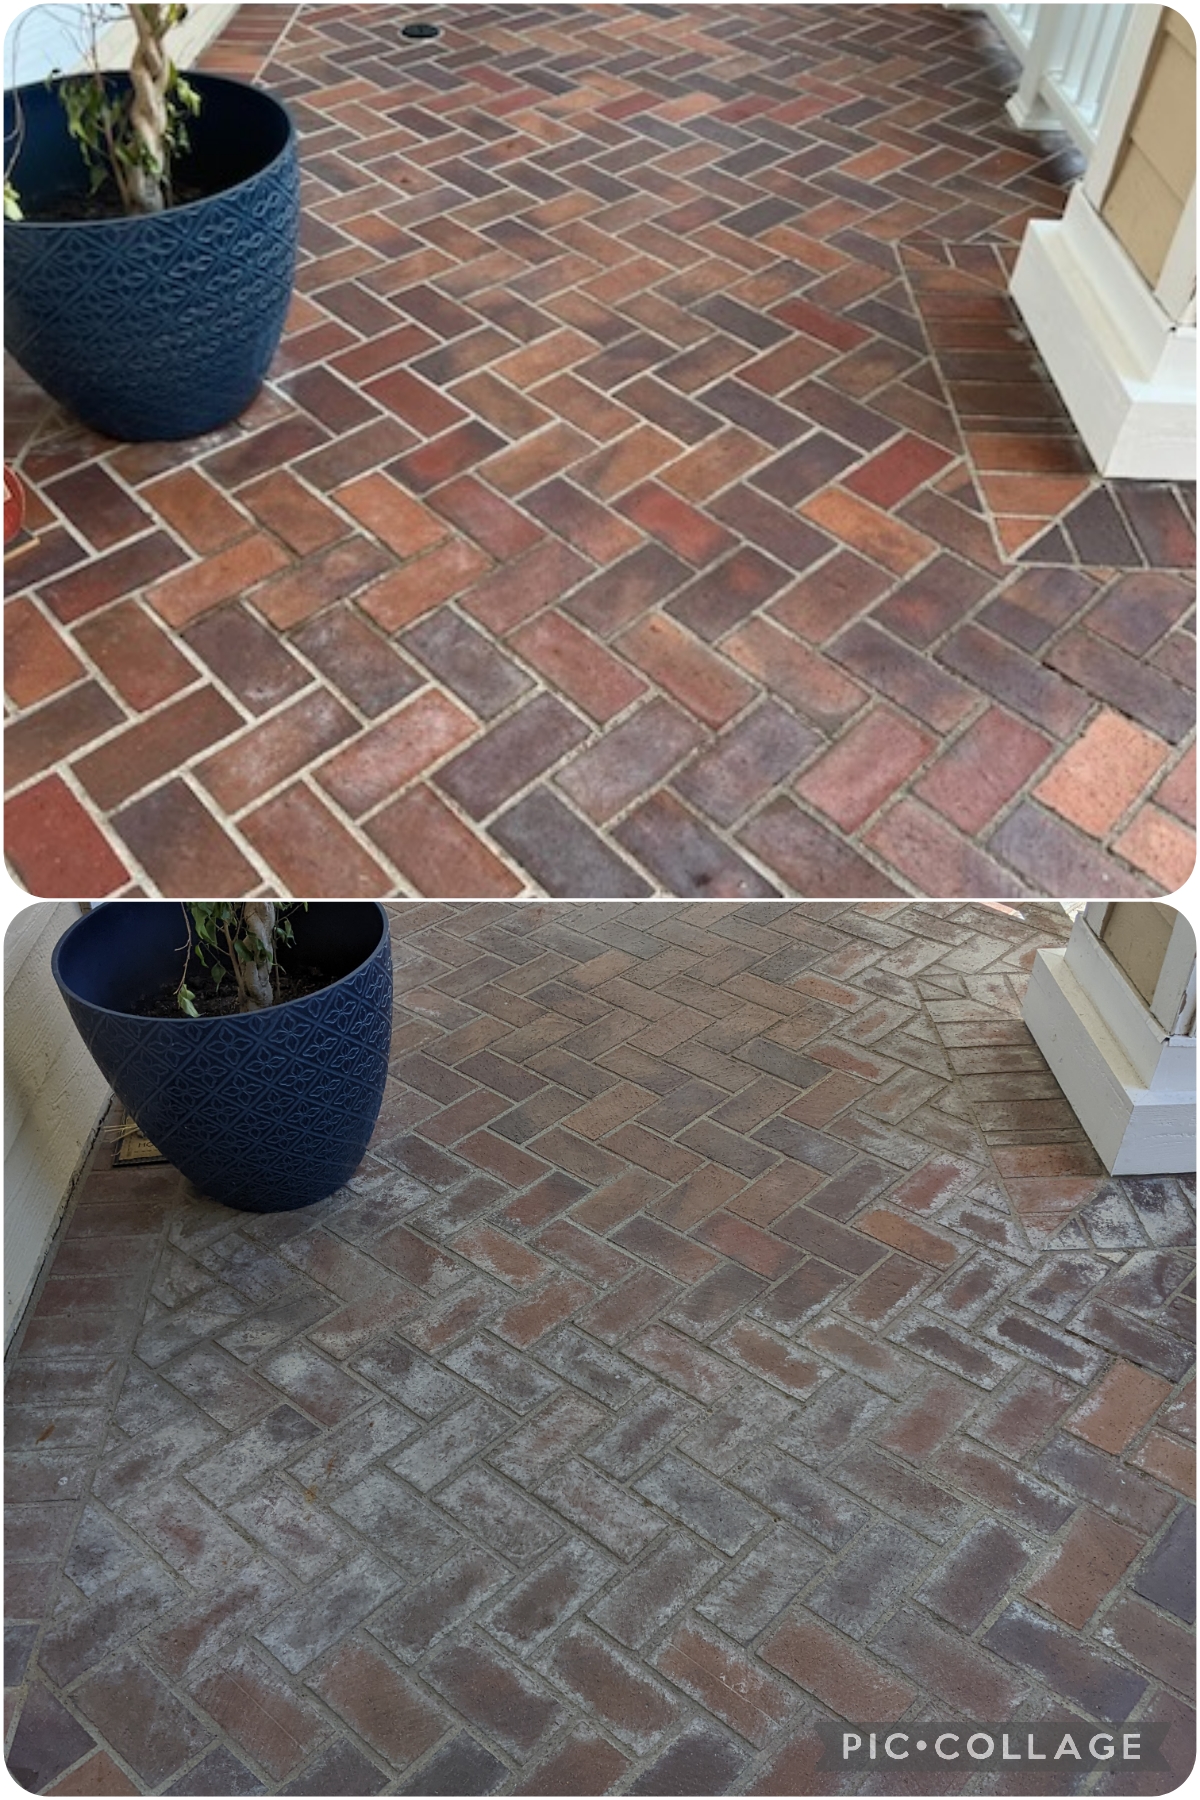 Efflorescence and hard water deposit removal from brick surfaces.